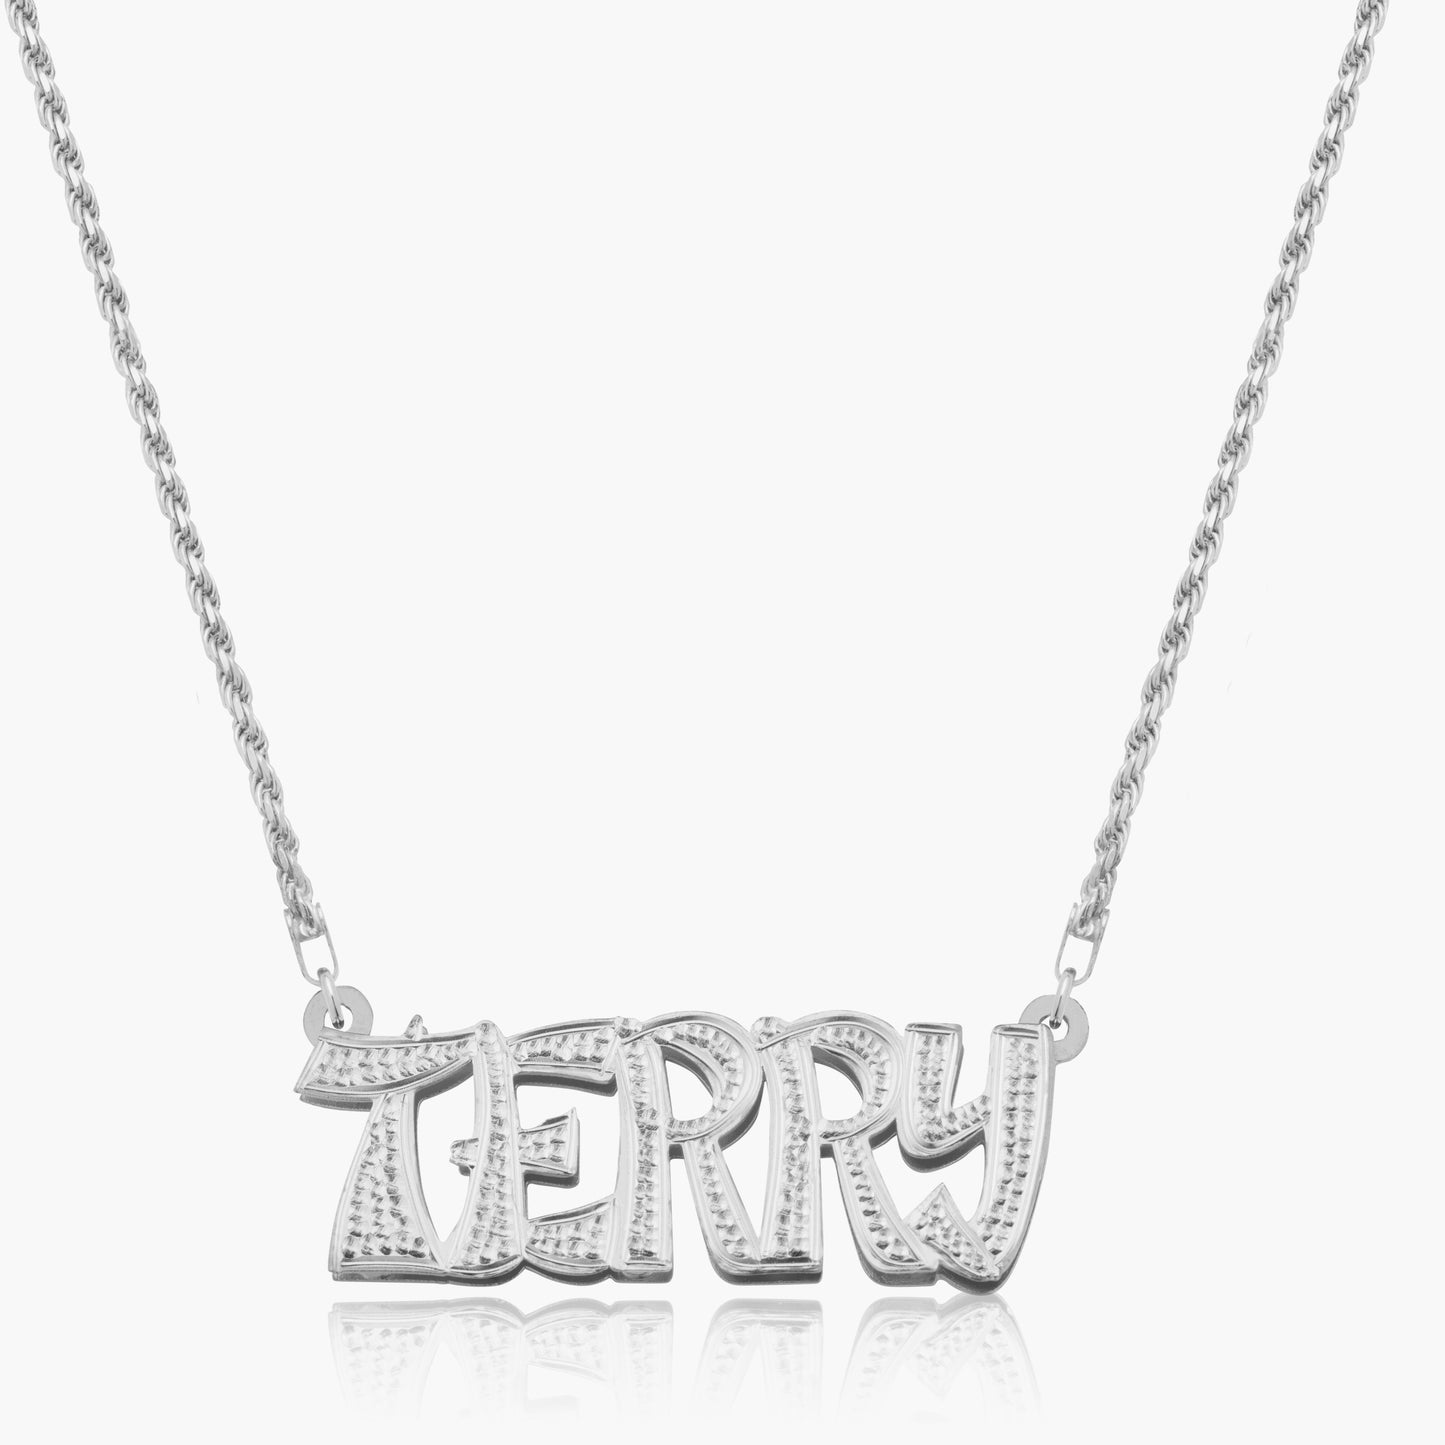 Double Plated "Take-out" Name Necklace